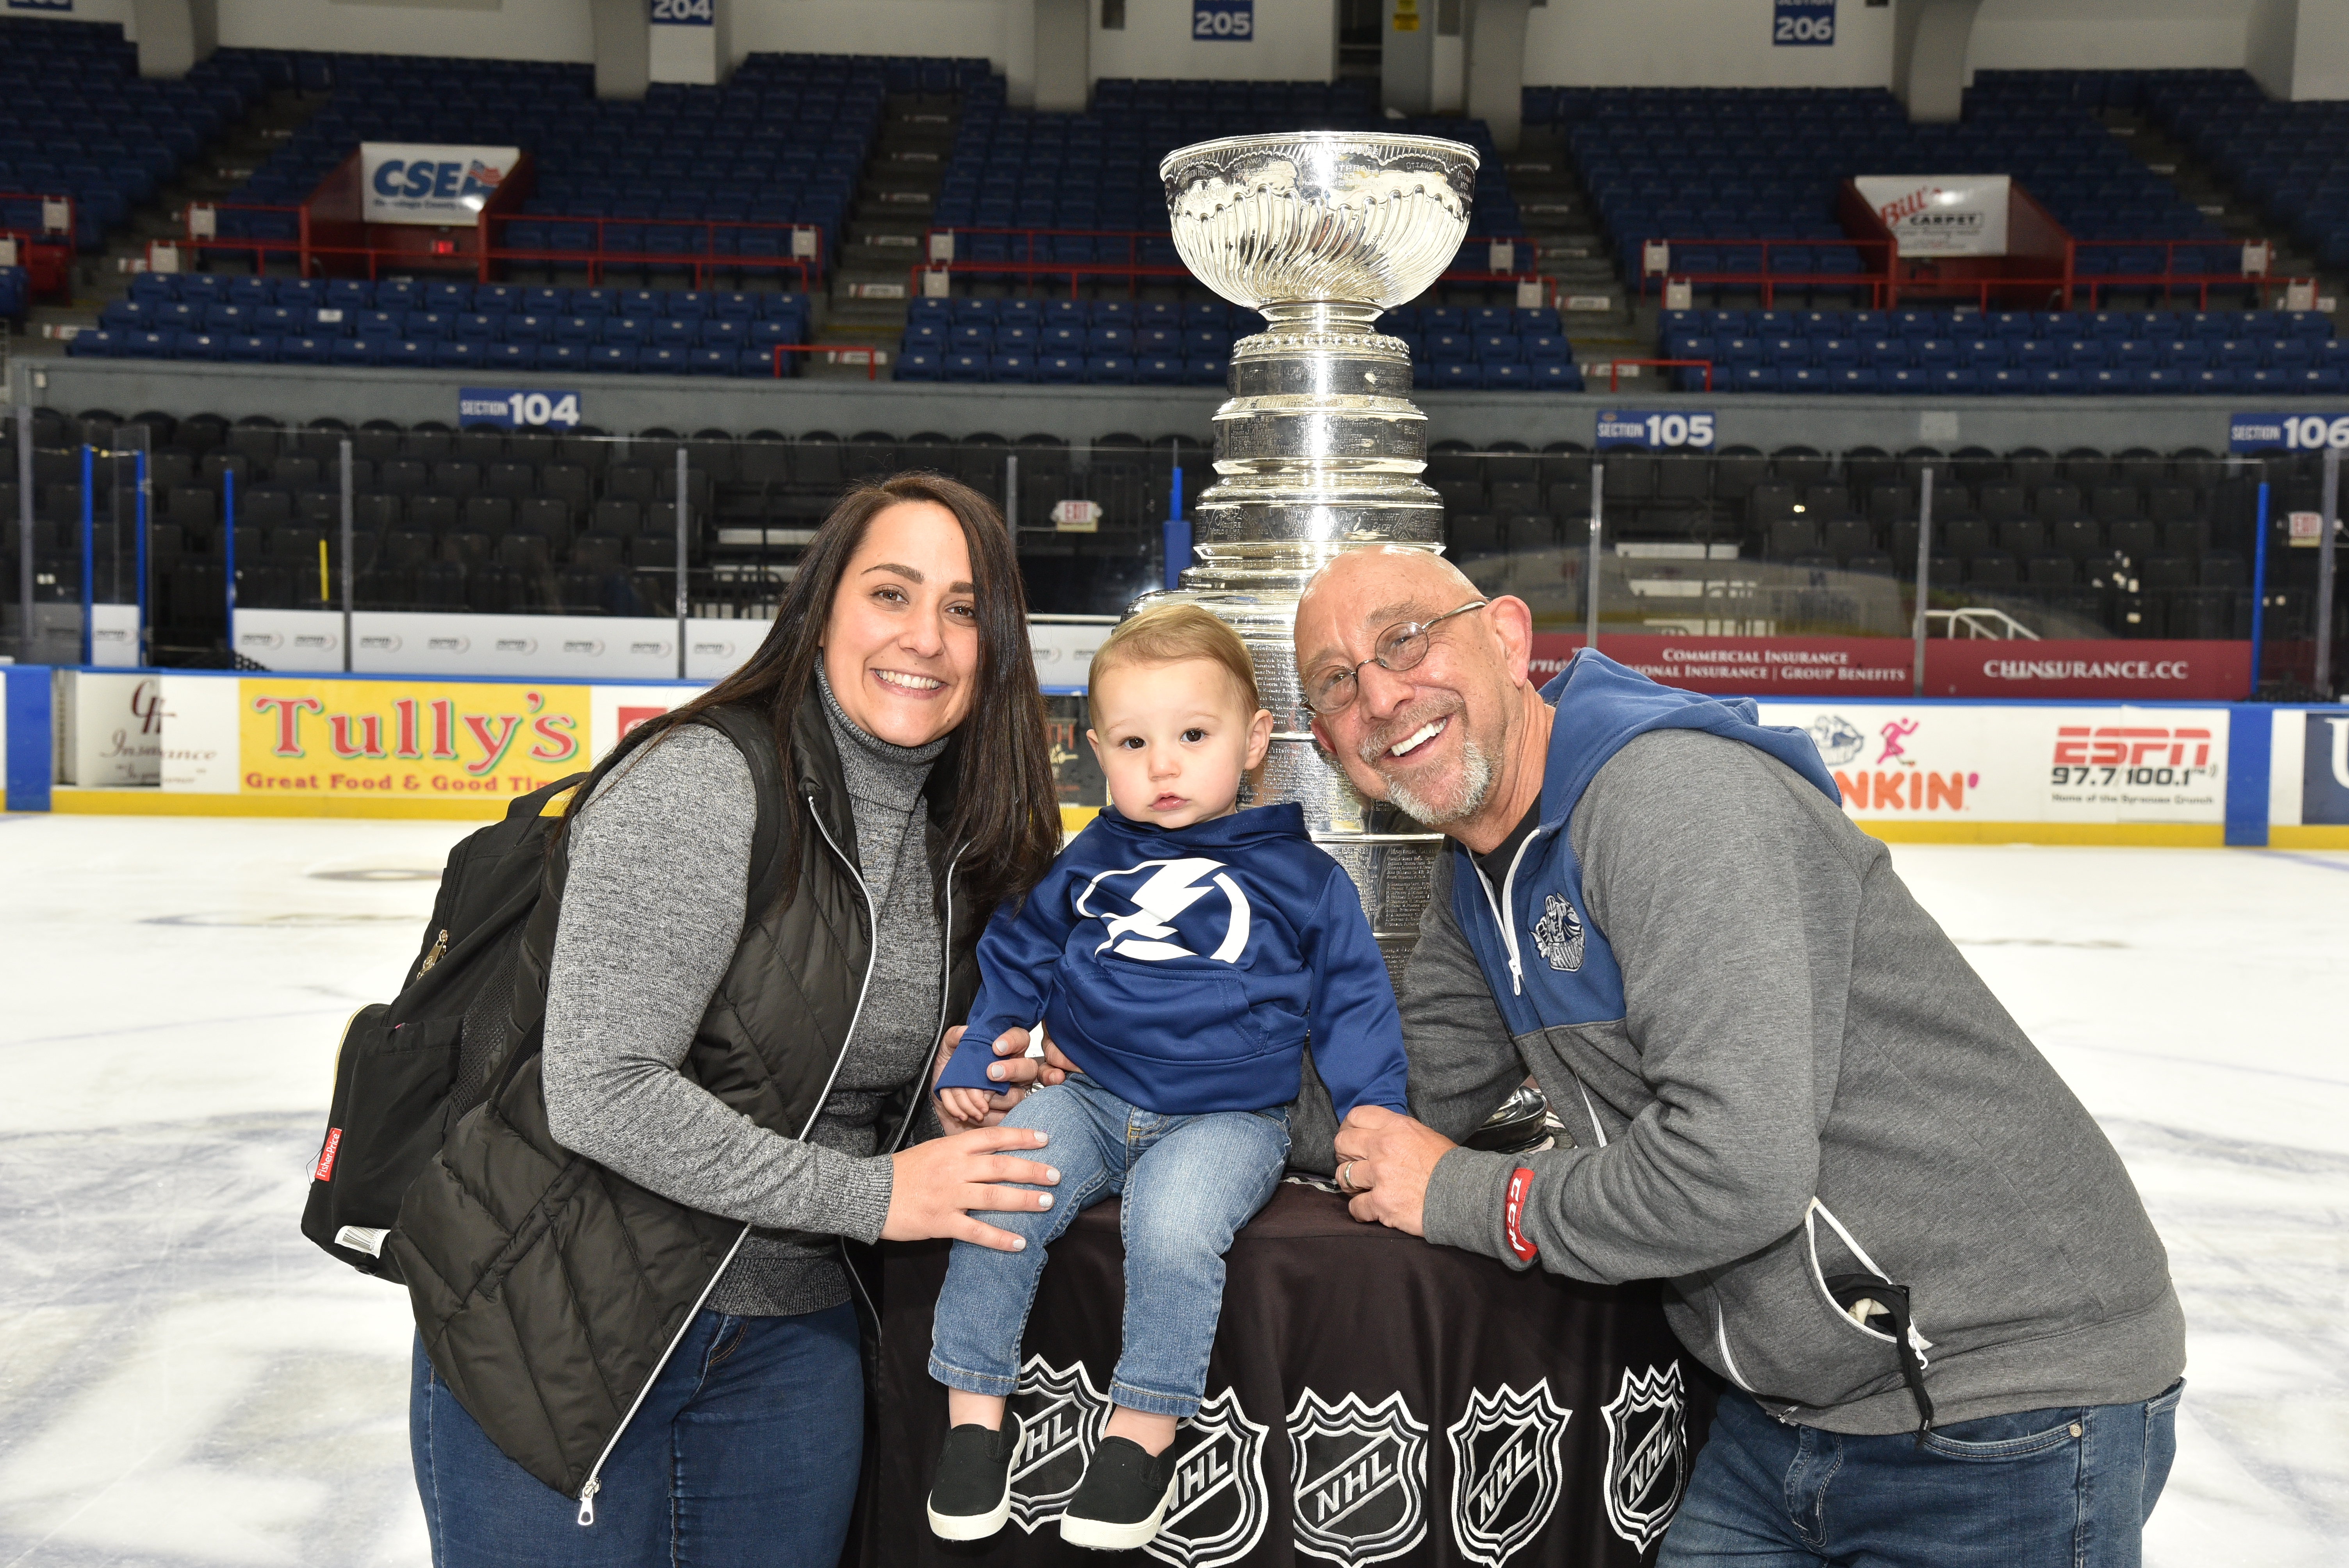 Stanley Cup a big draw in its visit to Syracuse (136 photos) 